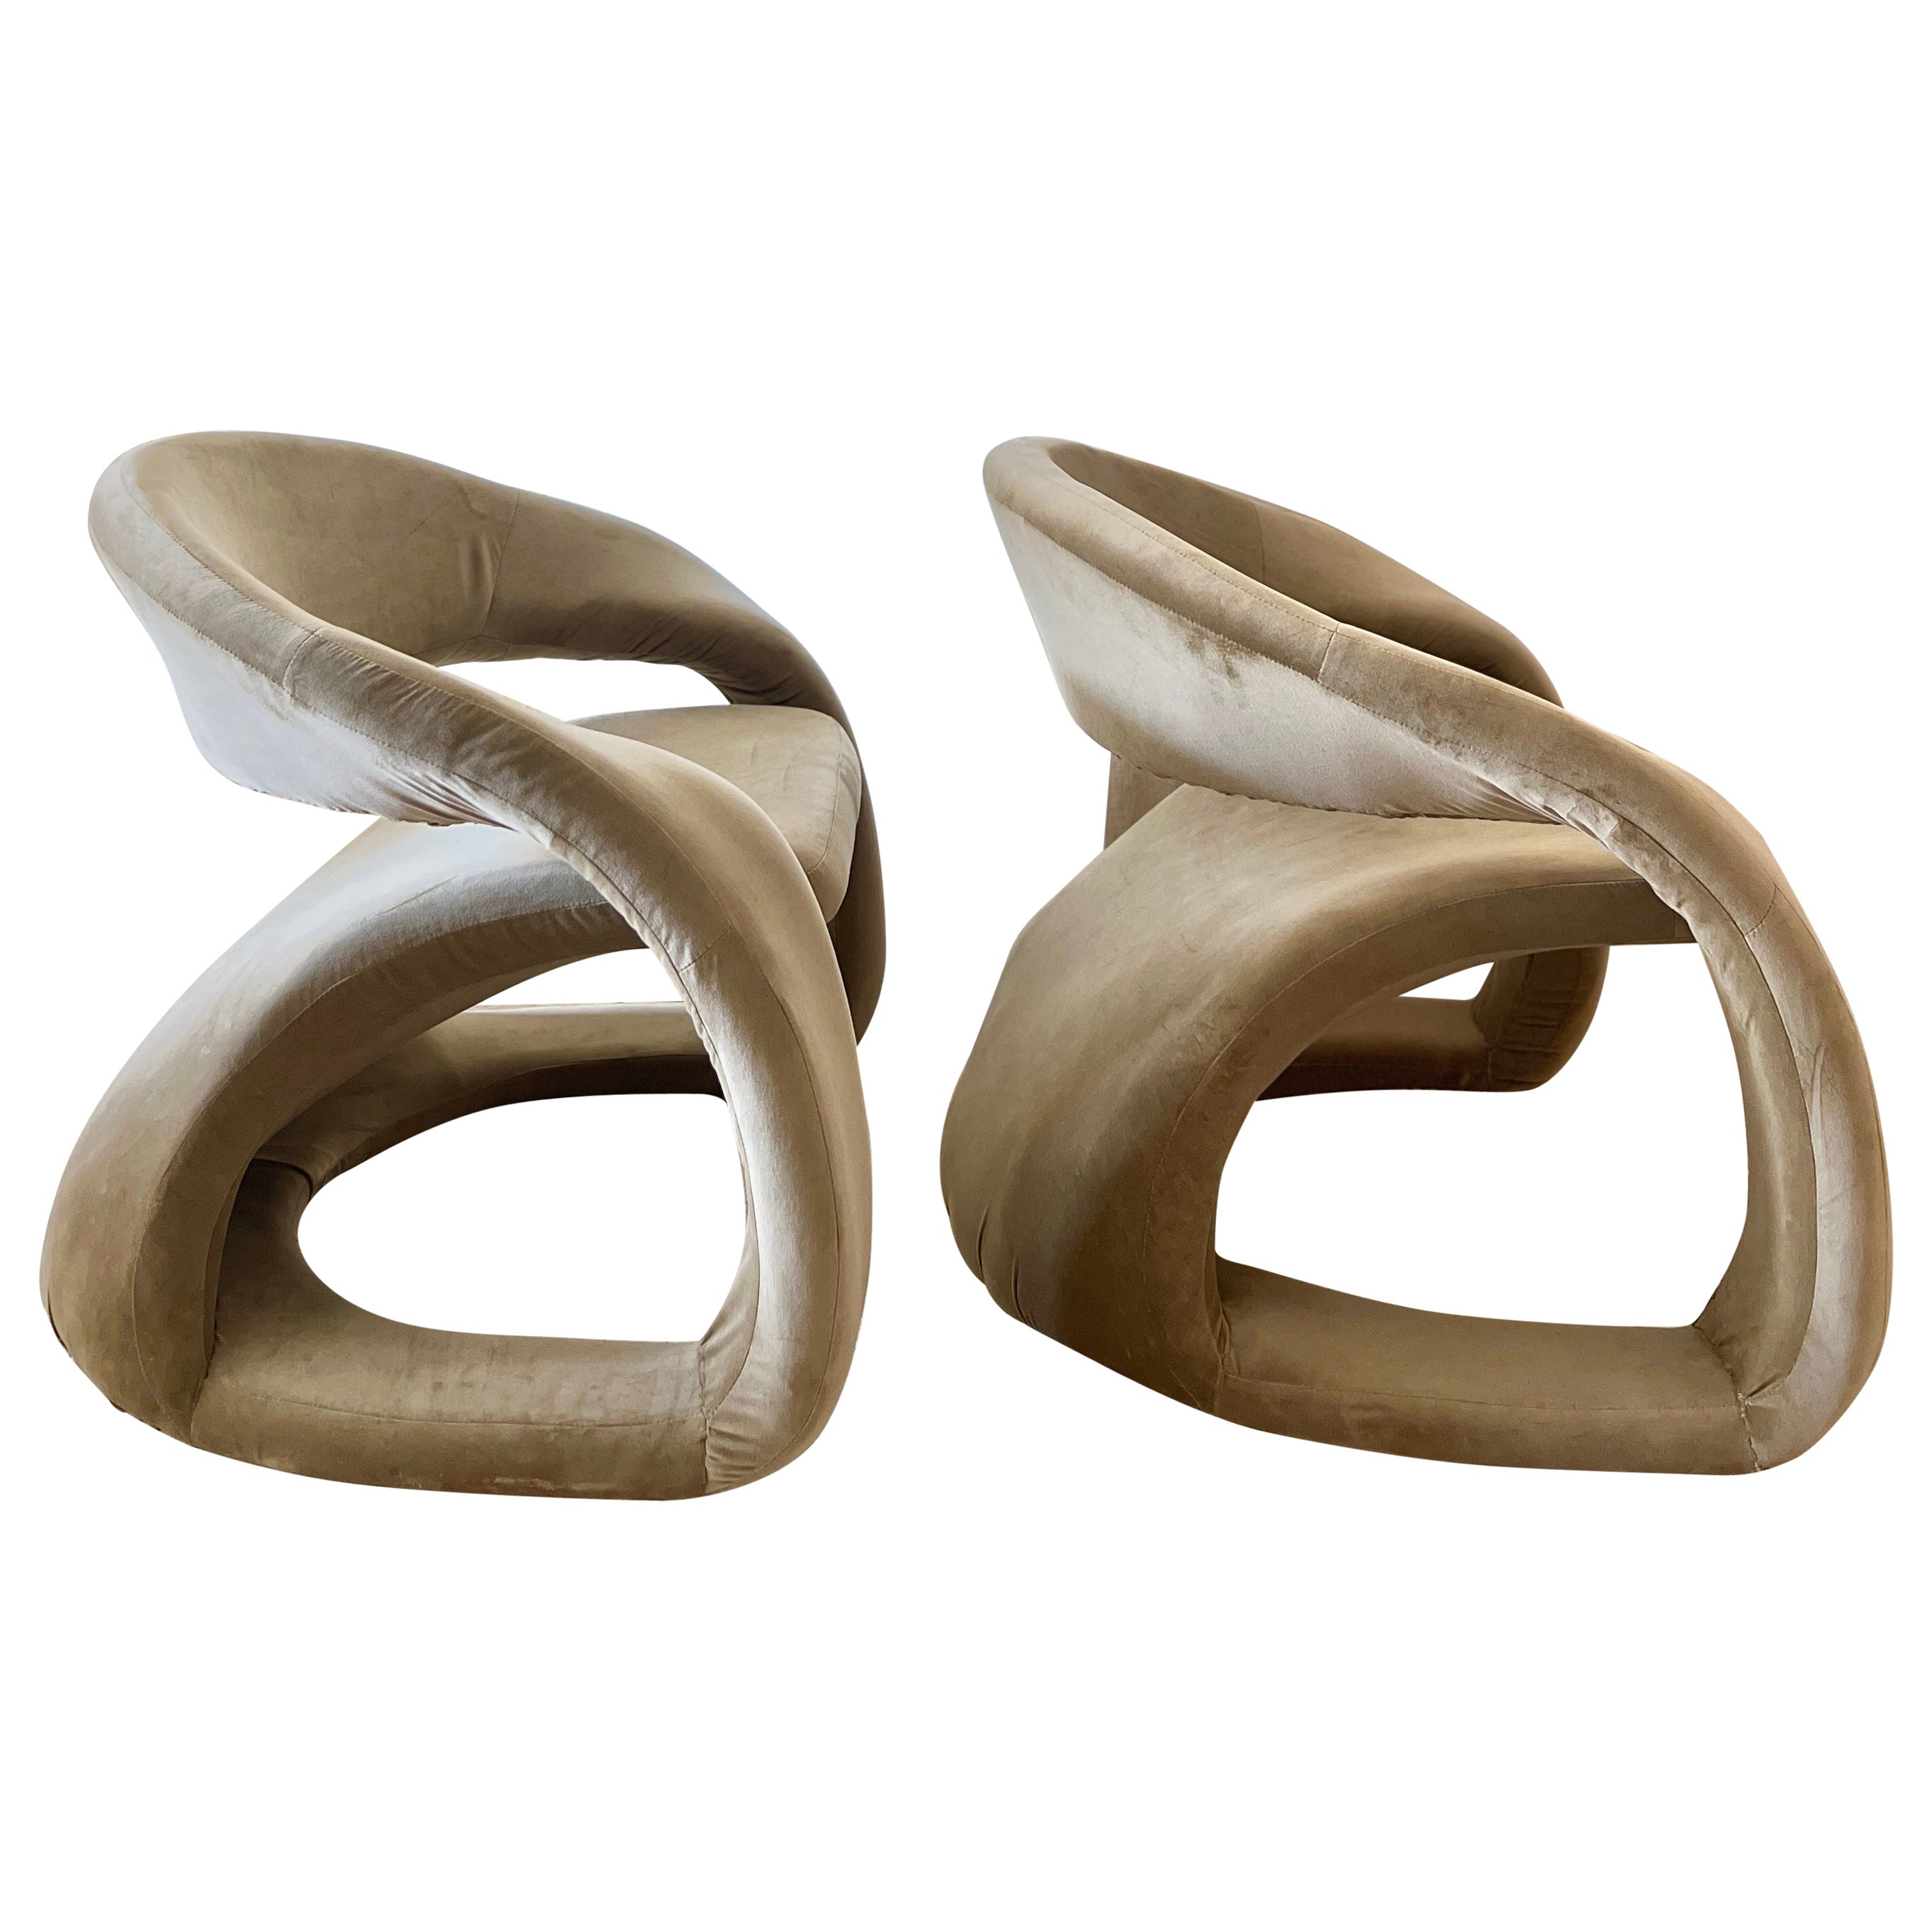 A pair of sculptural tongue chairs by Jaymar, circa 1980s. In sage green velvet